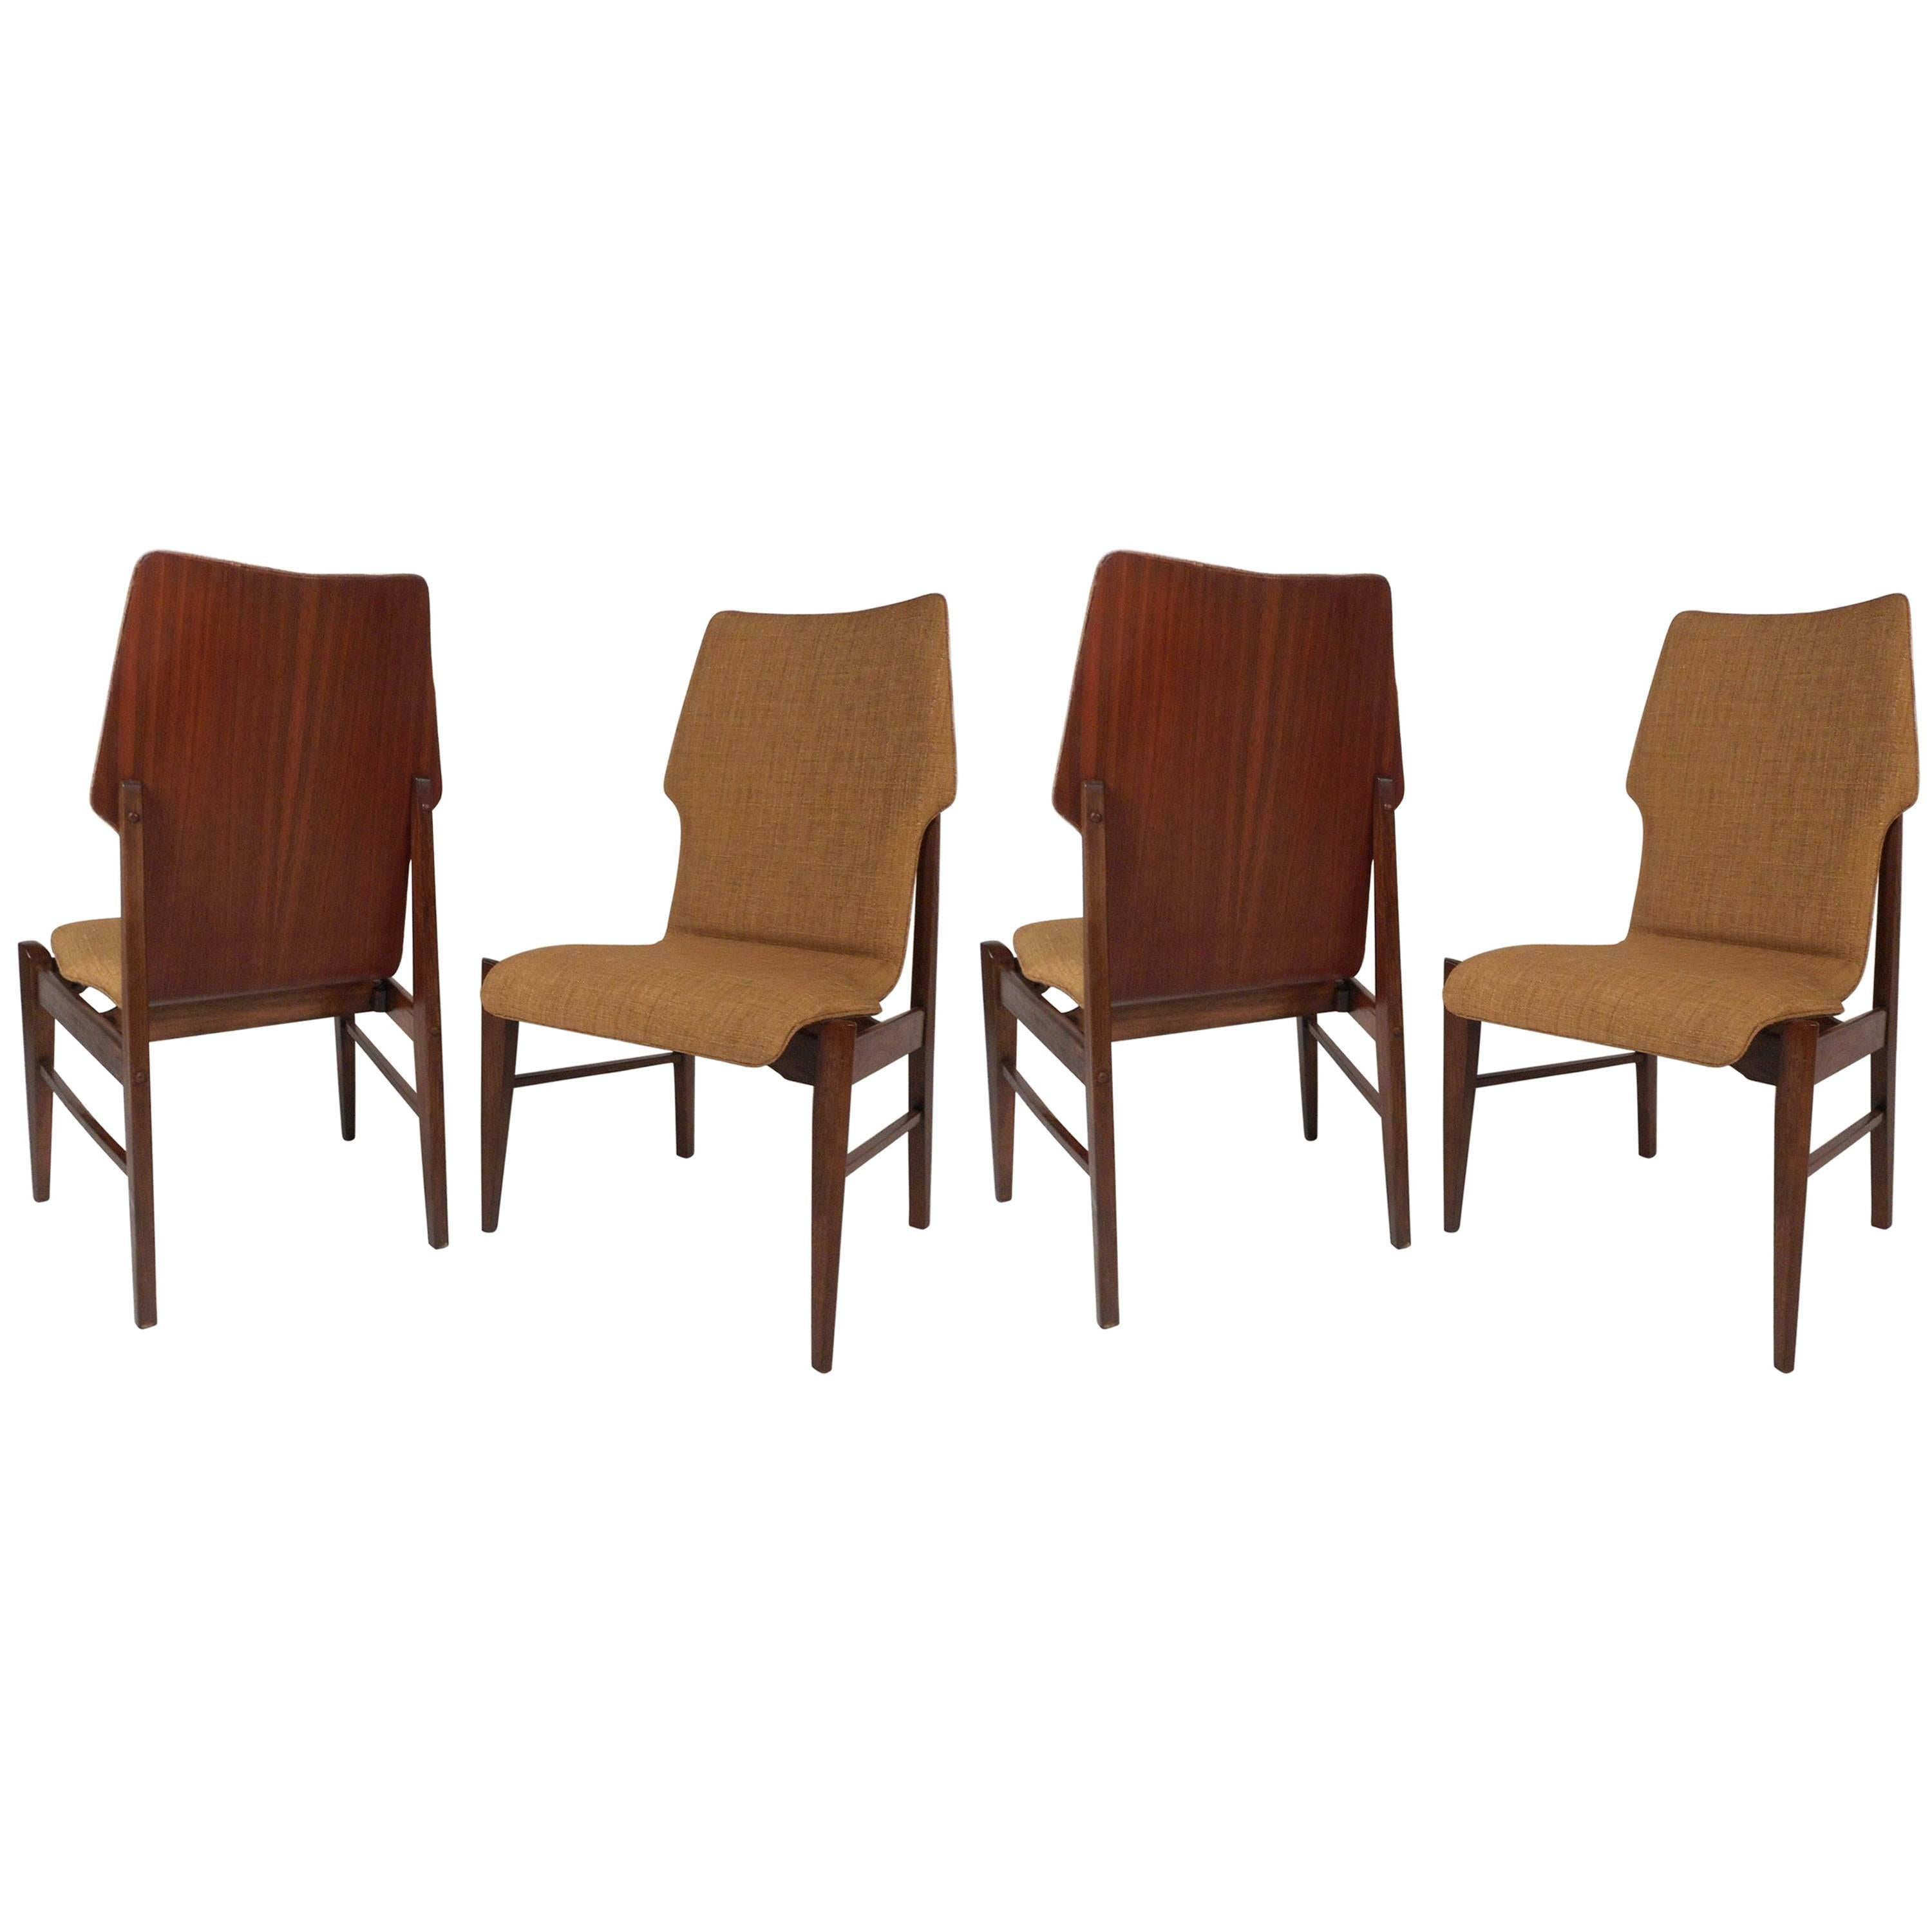 Set of Four Mid-Century Modern Wood Back Dining Chairs